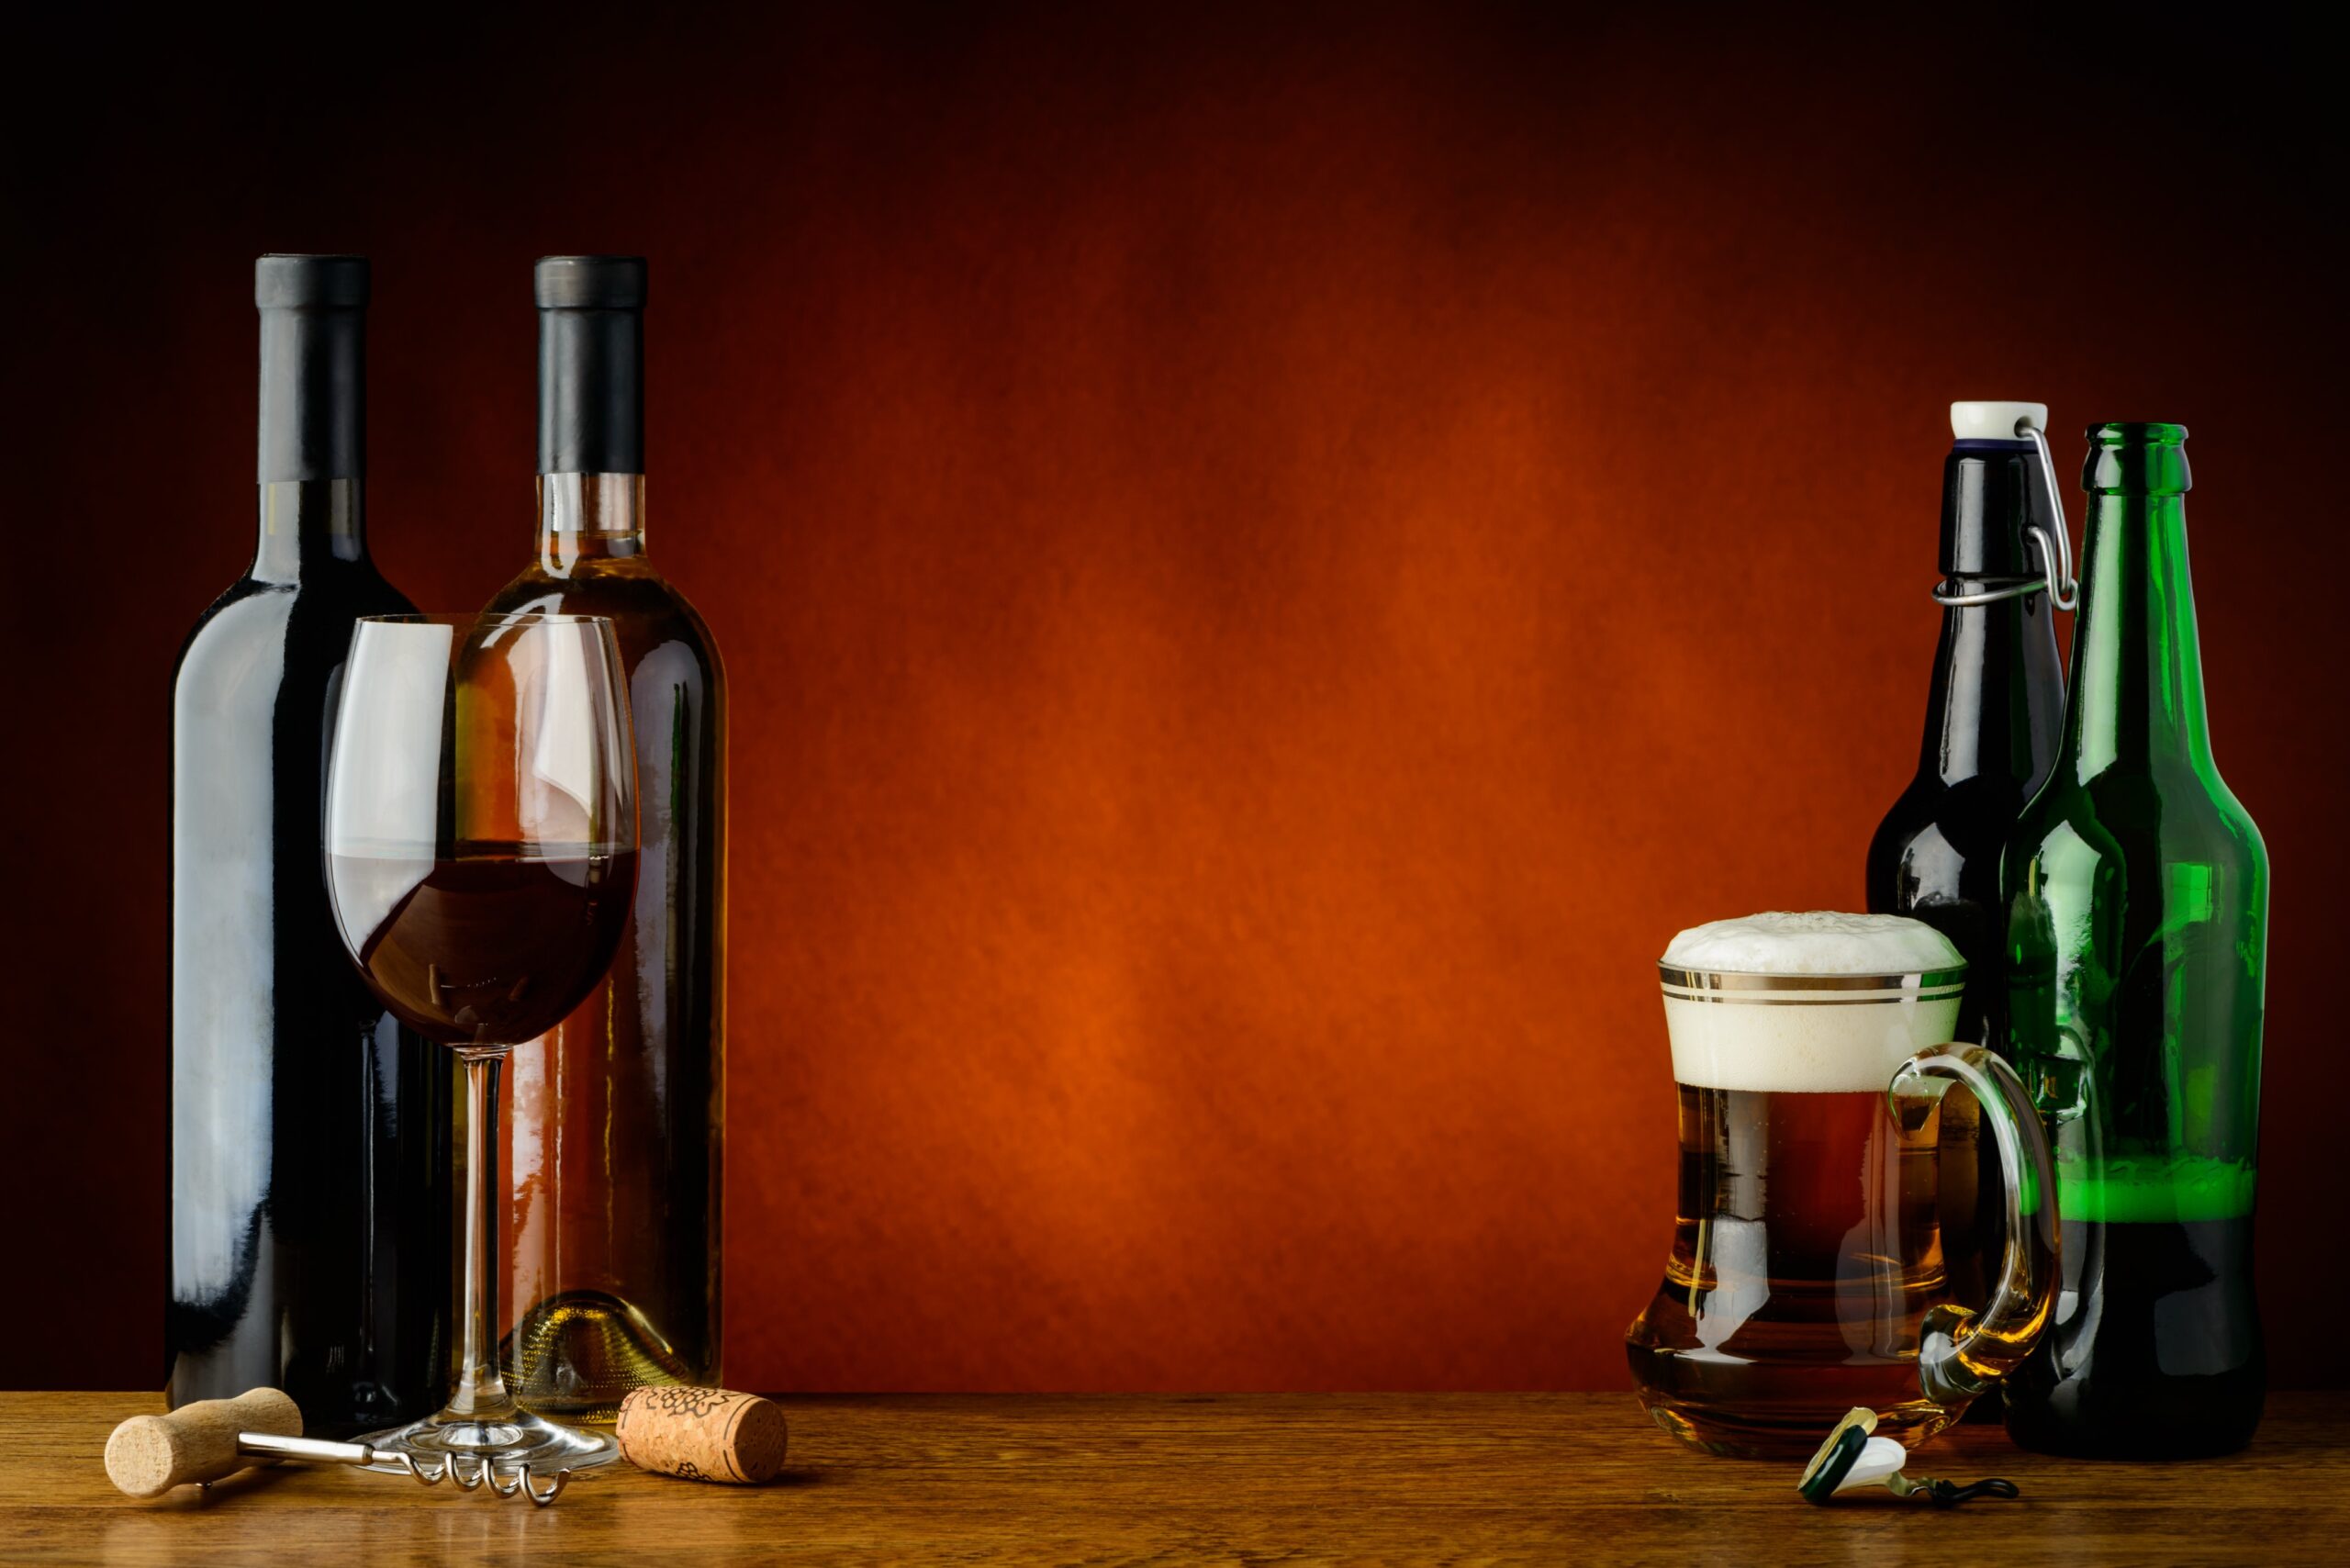 Routinely drinking alcohol may raise blood pressure even in adults without hypertension